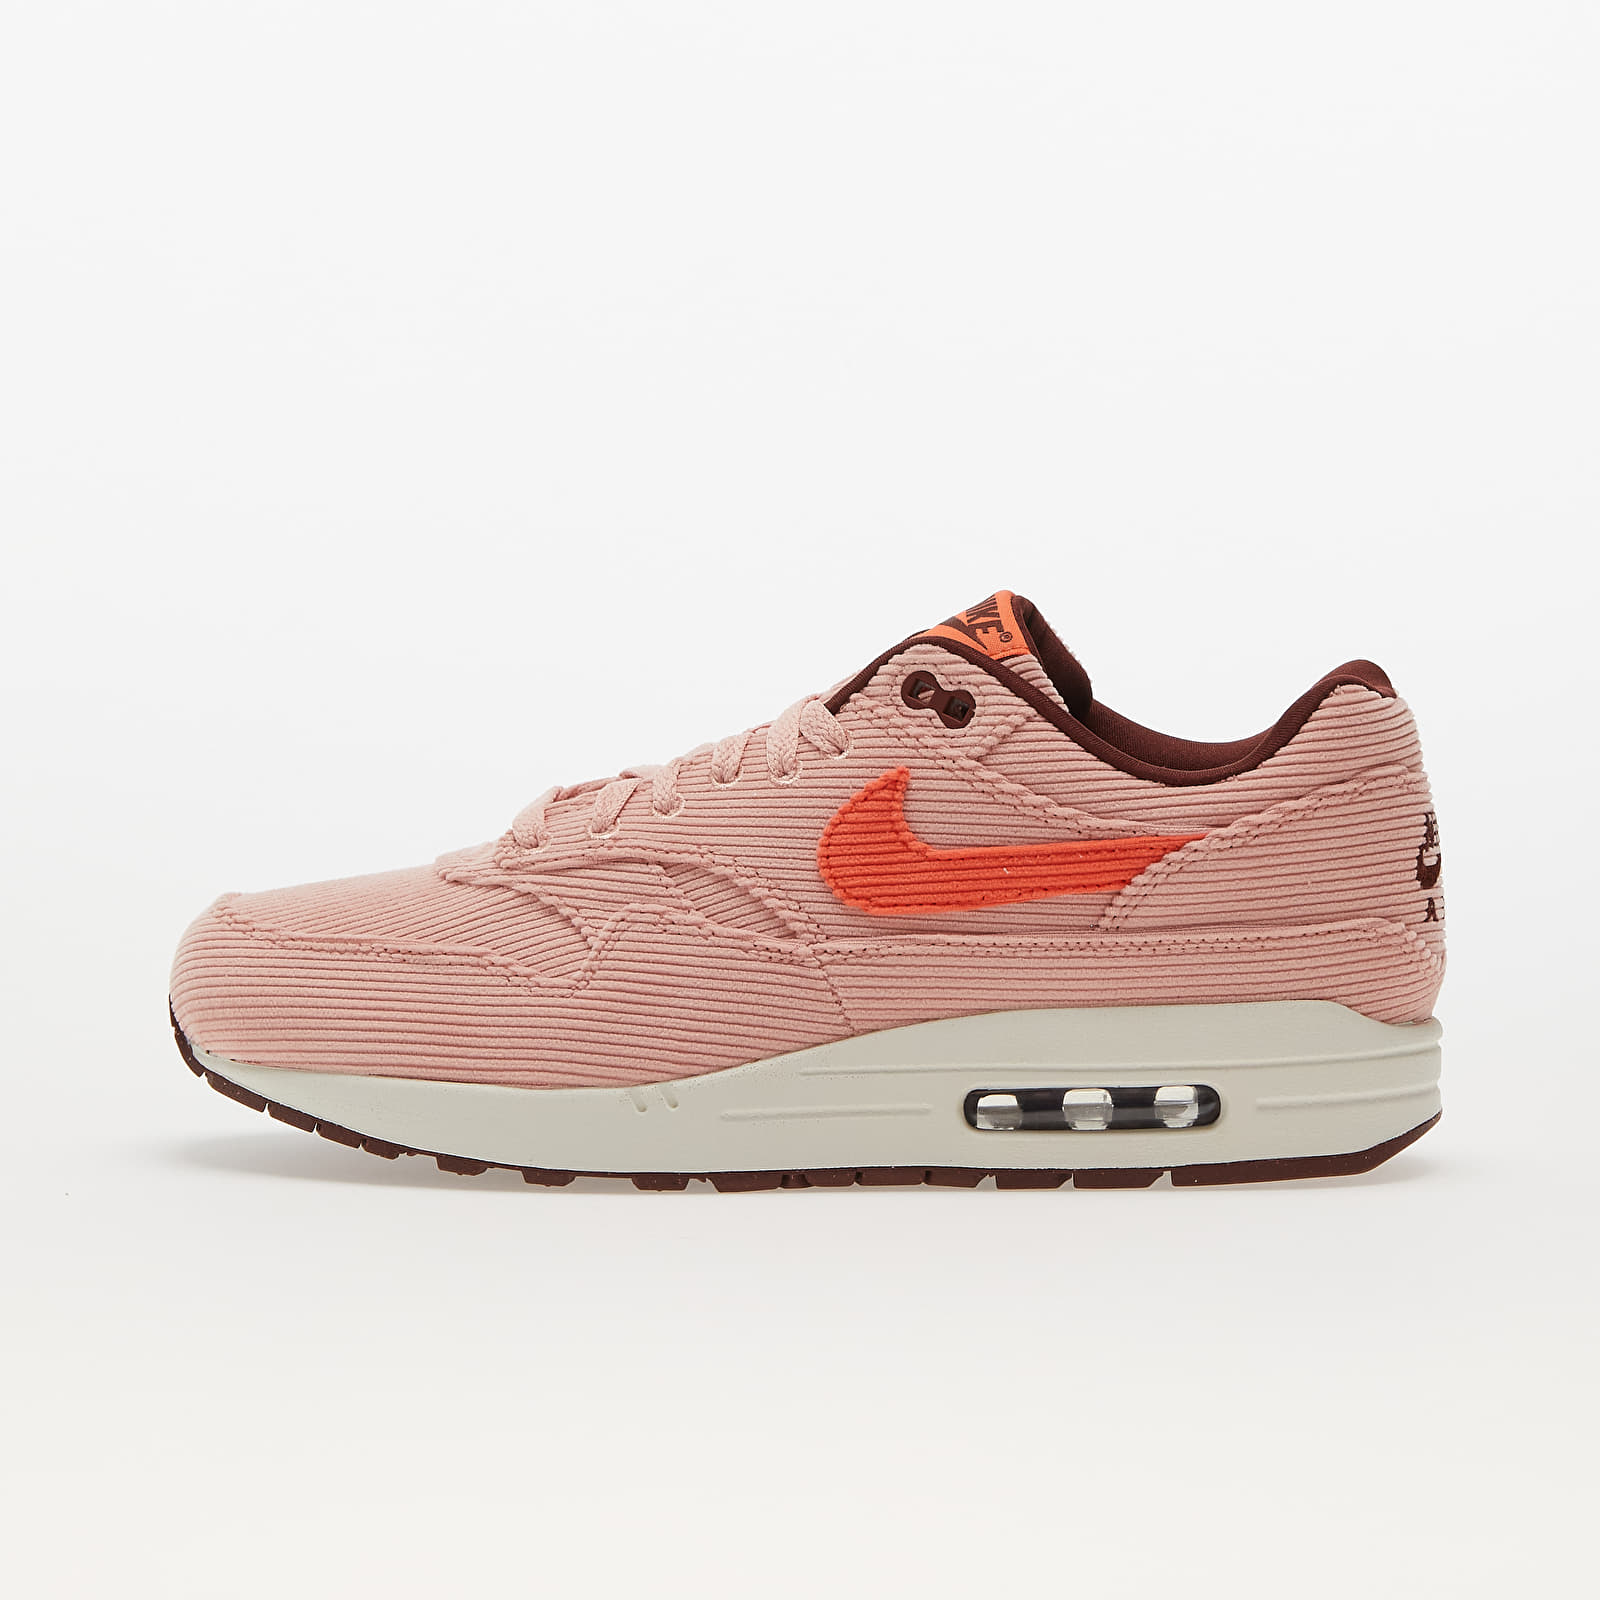 Pánské tenisky a boty Nike Air Max 1 Premium Coral Stardust/ Bright Coral-Oxen Brown